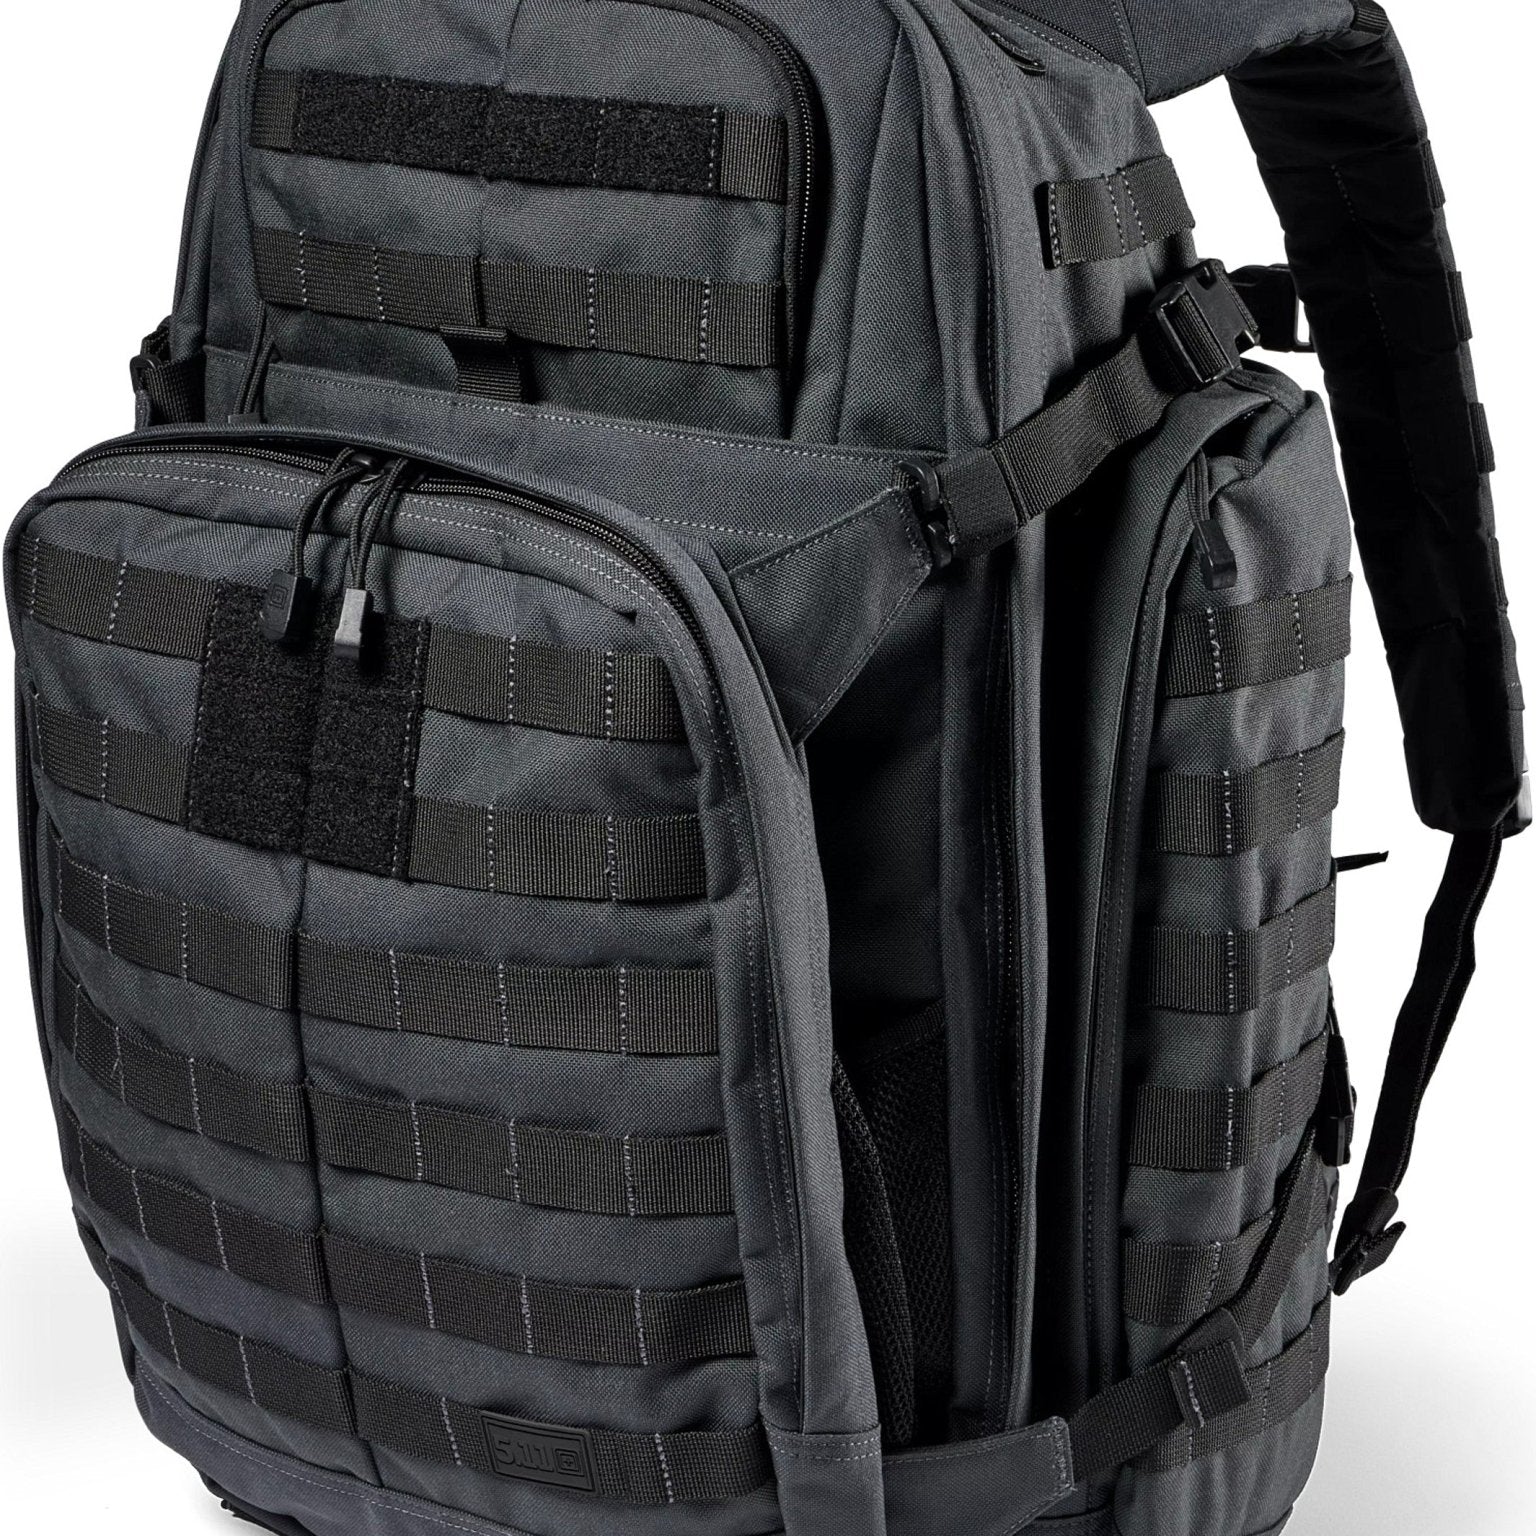 4elementsclothing5.11 Tactical5.11 Tactical - 5.11 Tactical Rush 72 2.0 Backpack - Style 56565Bag56565-026